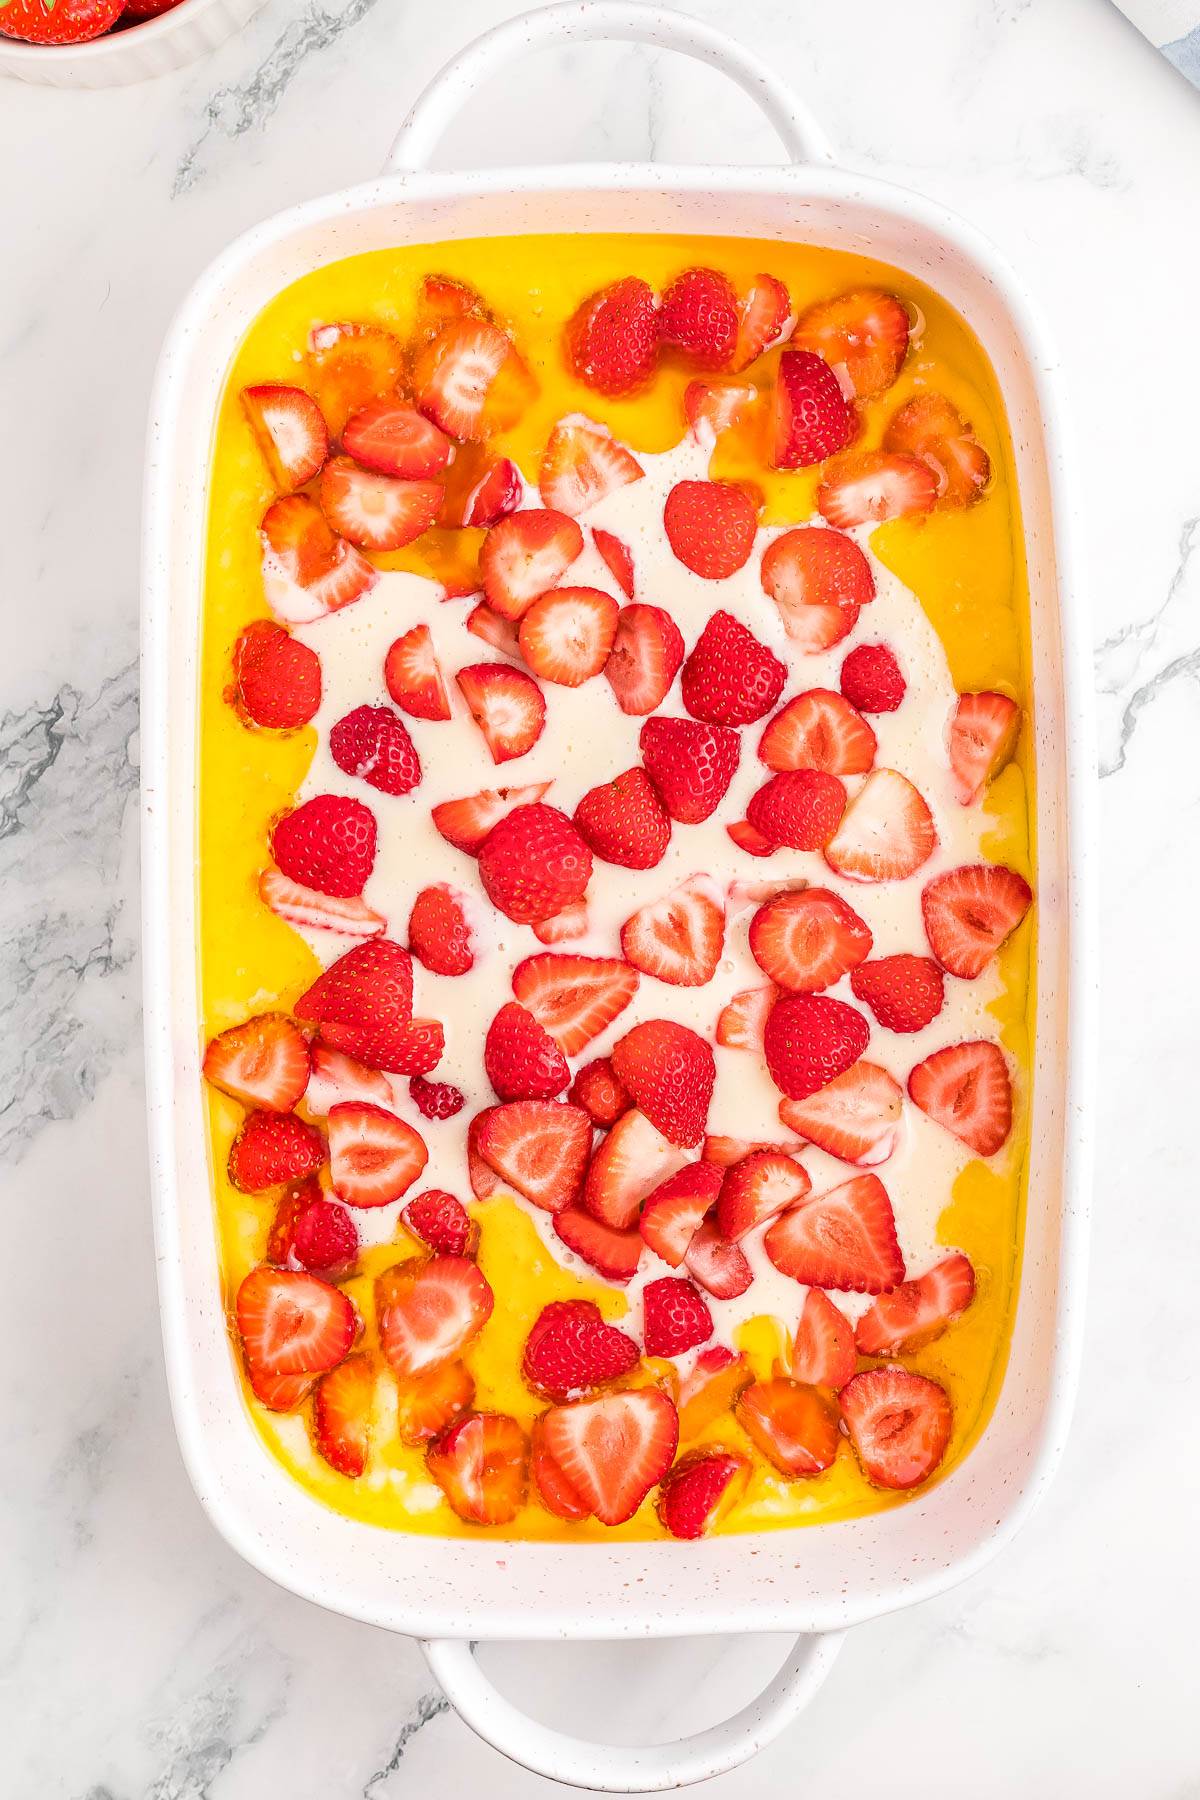 A dish of sliced strawberries on a bed of creamy custard in a white baking dish, viewed from above on a marble surface.